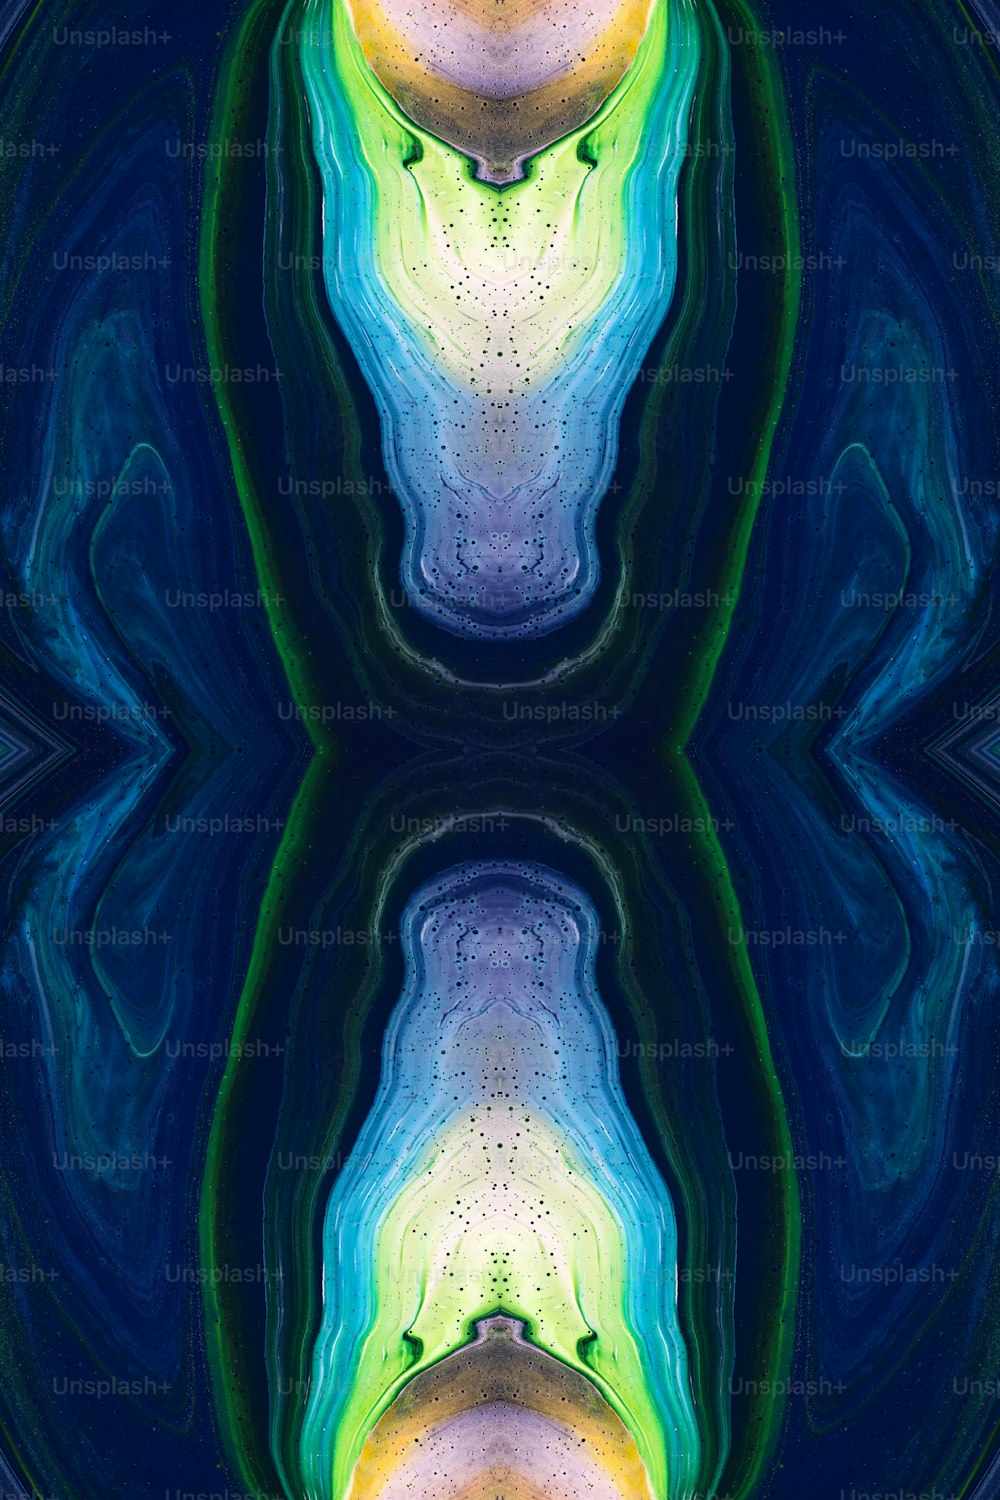 an abstract image of a blue, yellow, and green pattern